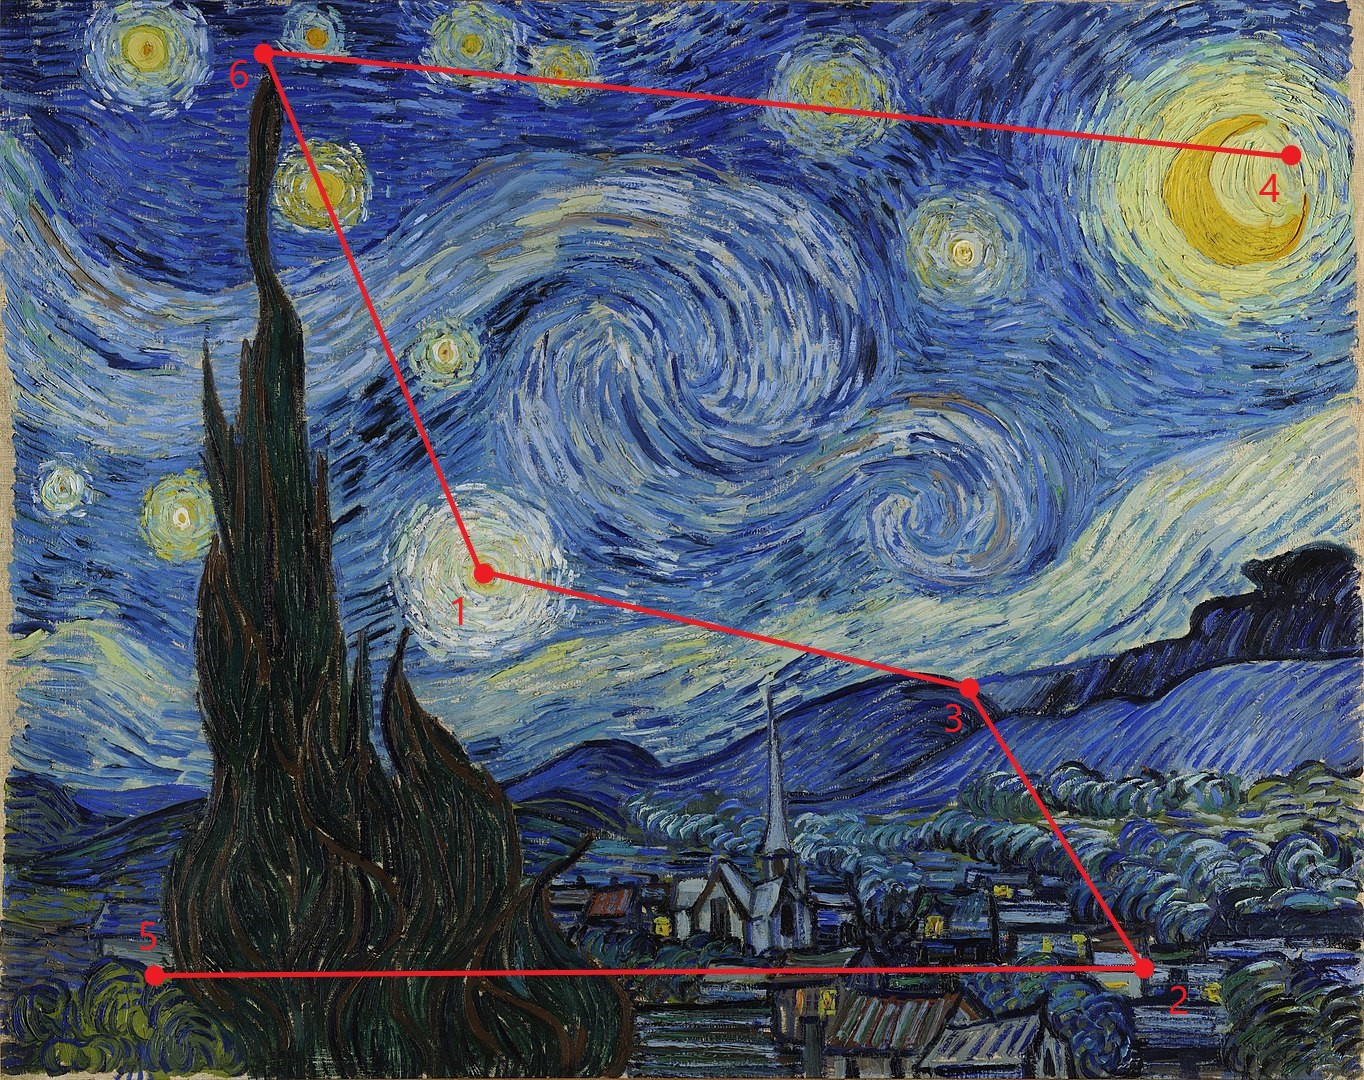 Image of The Starry Night with six points overlaid, with lines drawing out a S